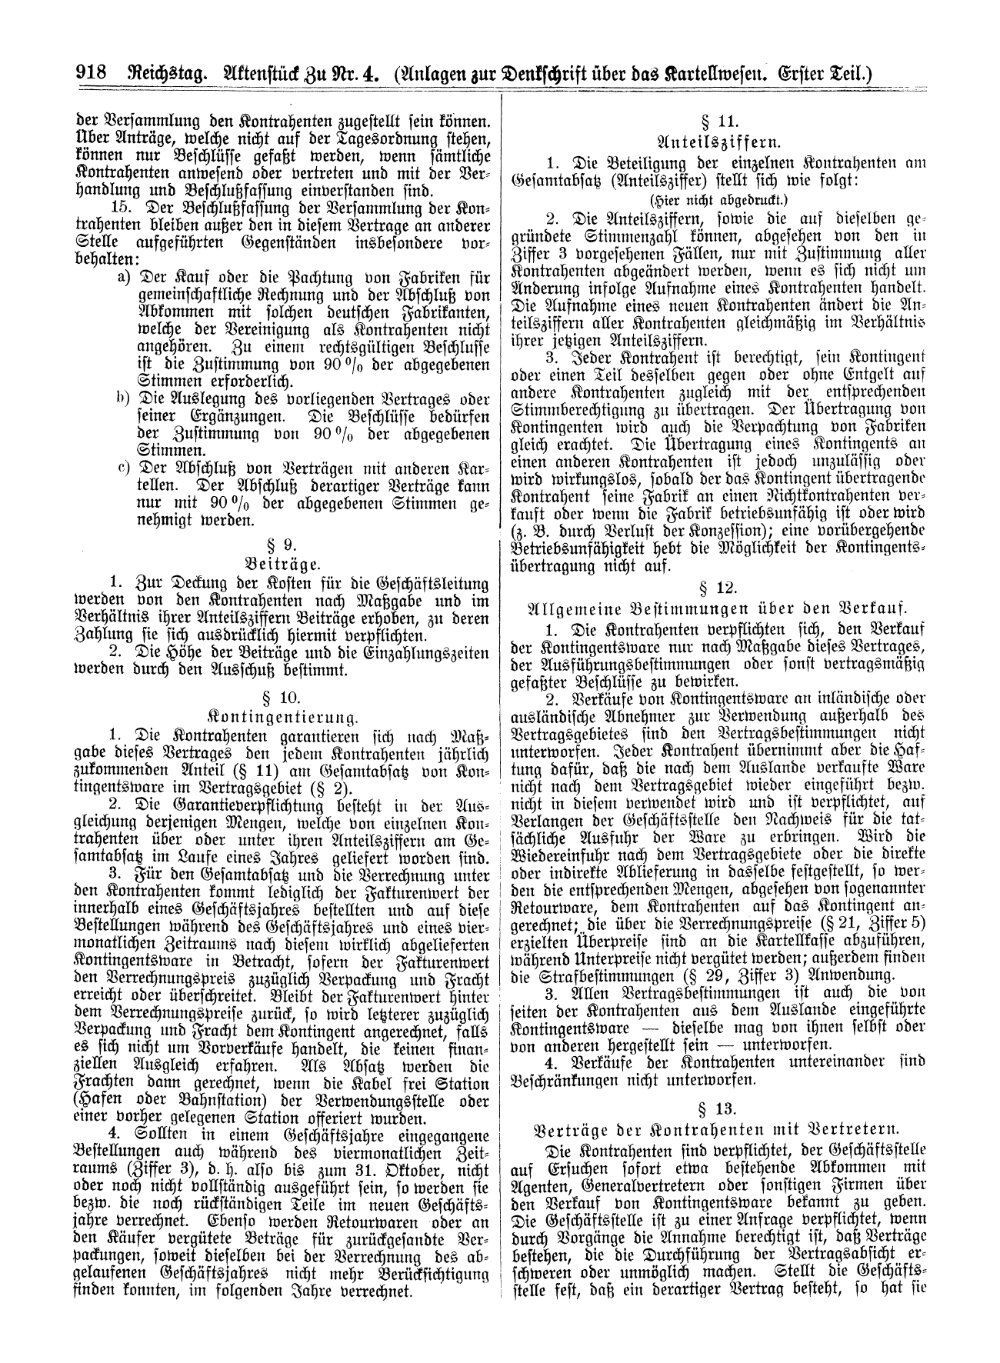 Scan of page 918